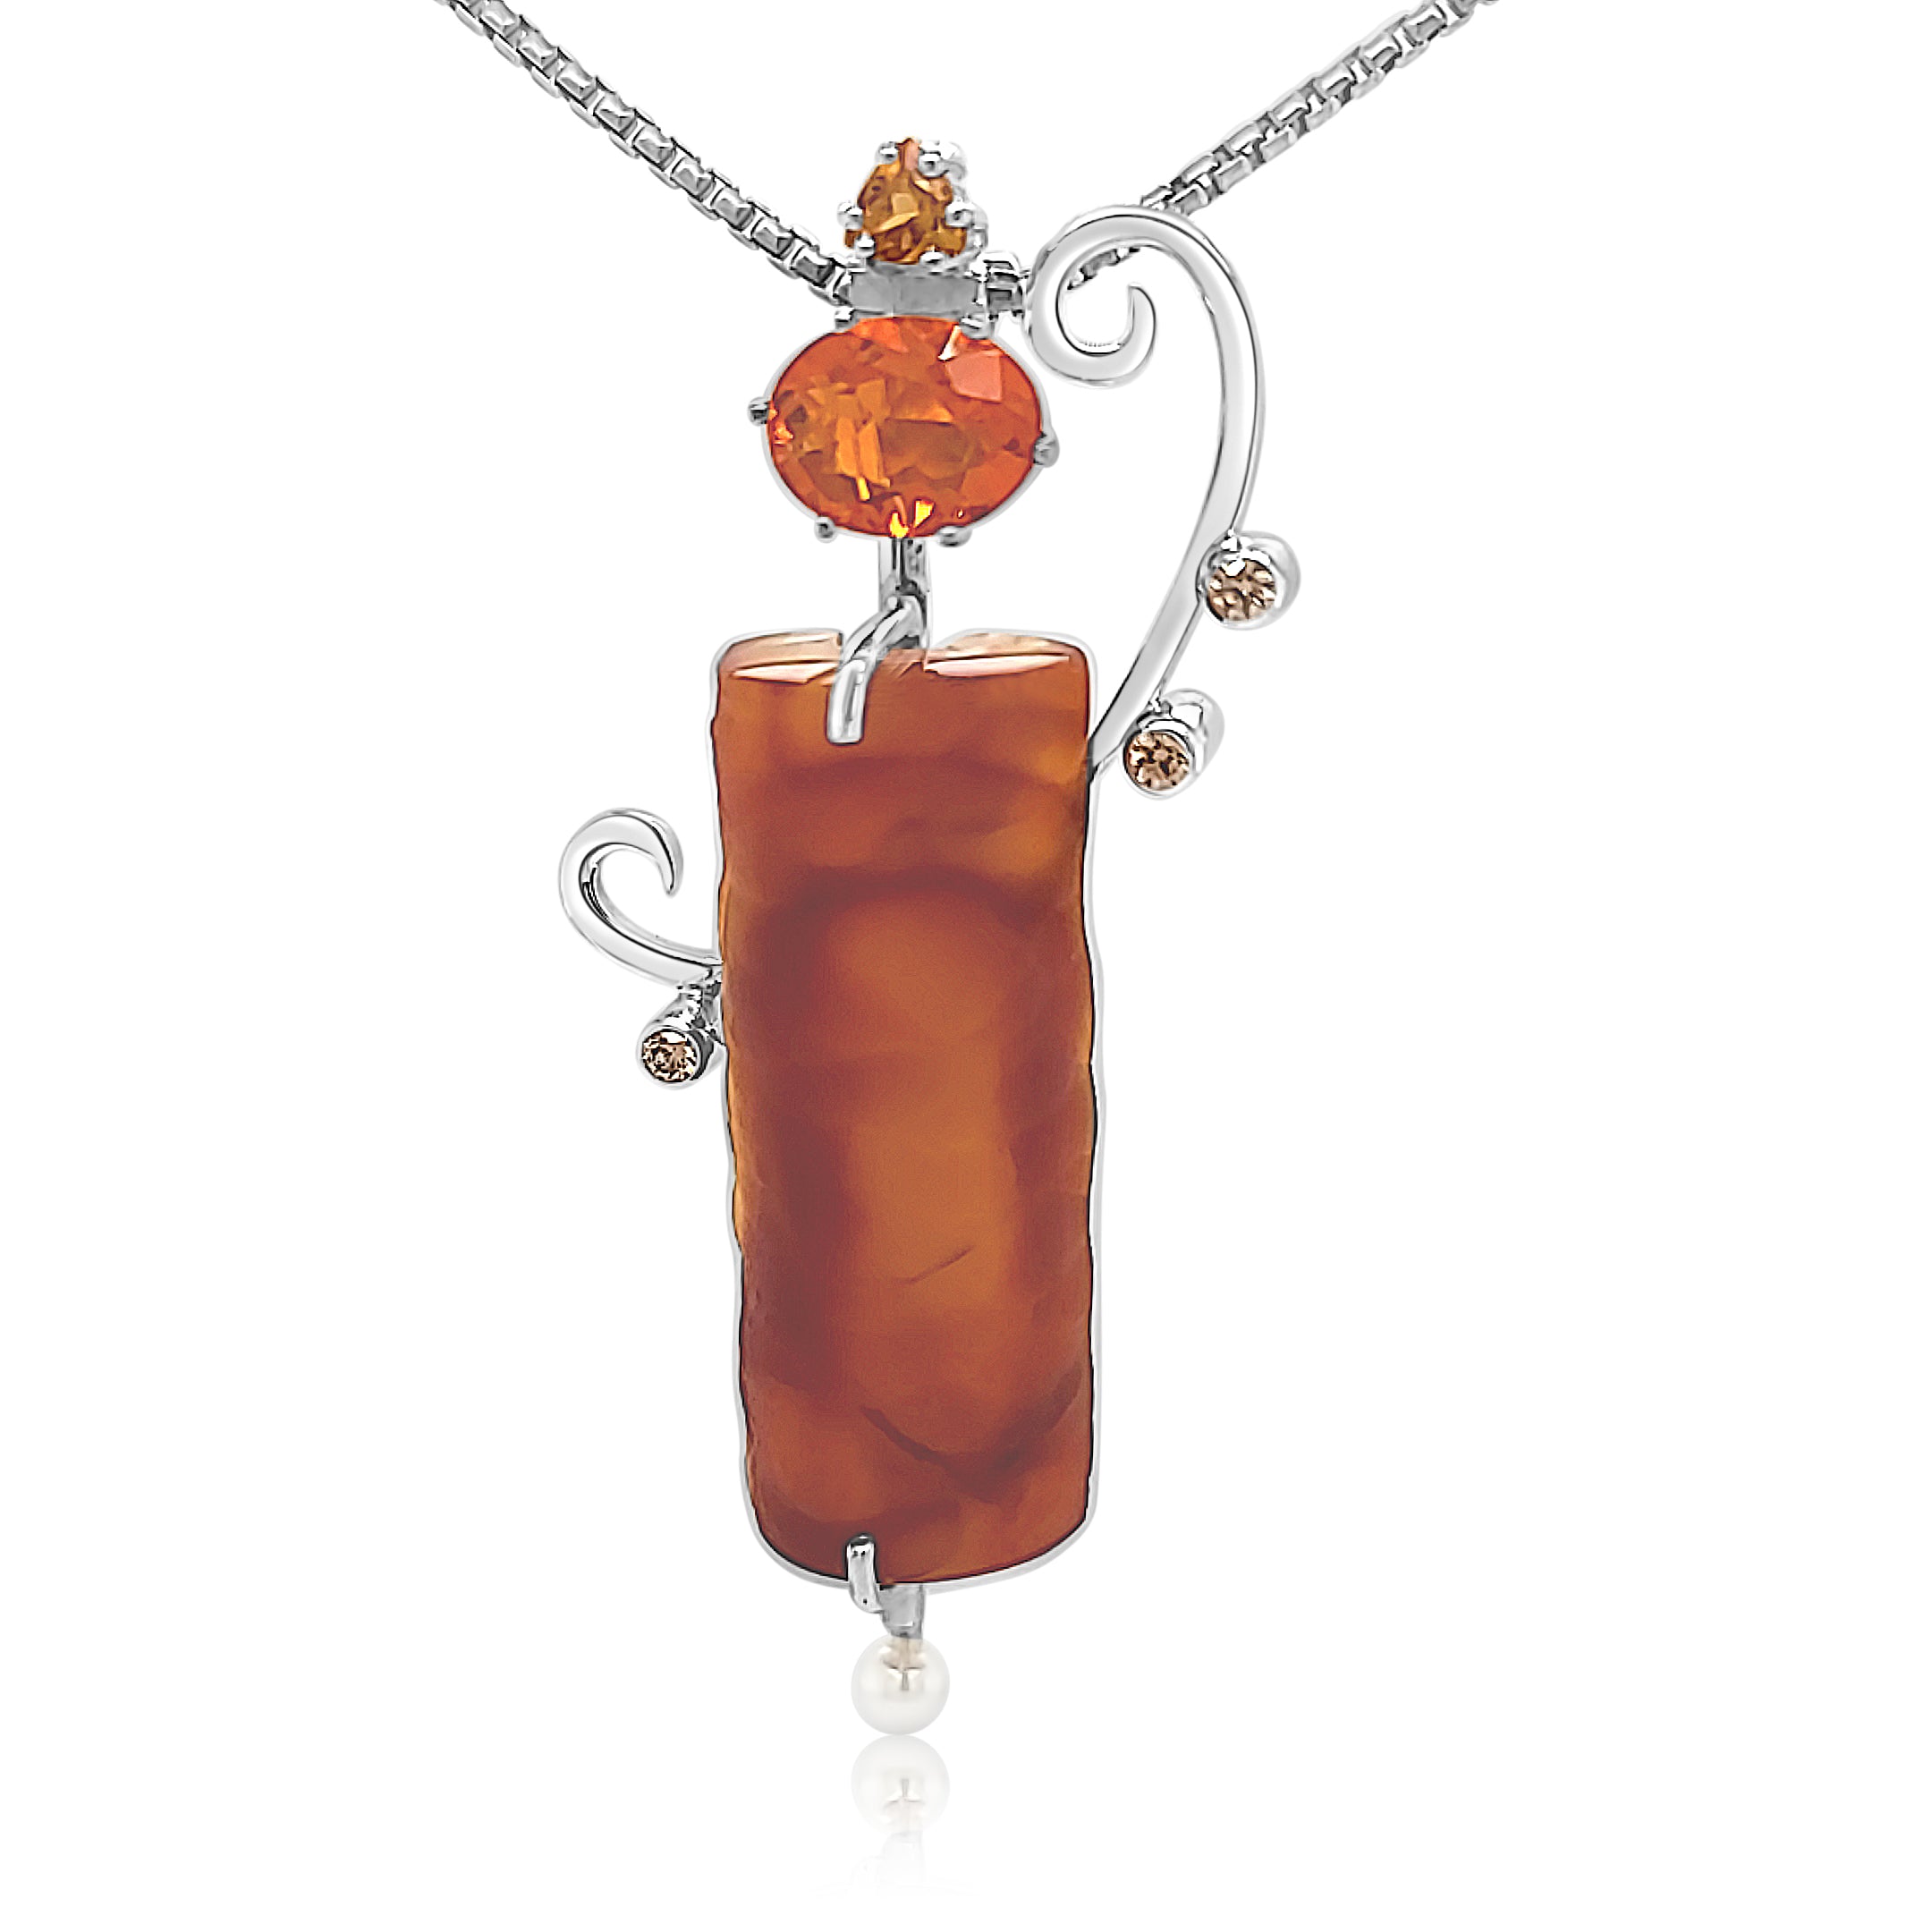 Fossilized Bamboo pendant with Mexican Opal, Citrine, Lab Spinel and Freshwater Pearls set in Sterling Silver.